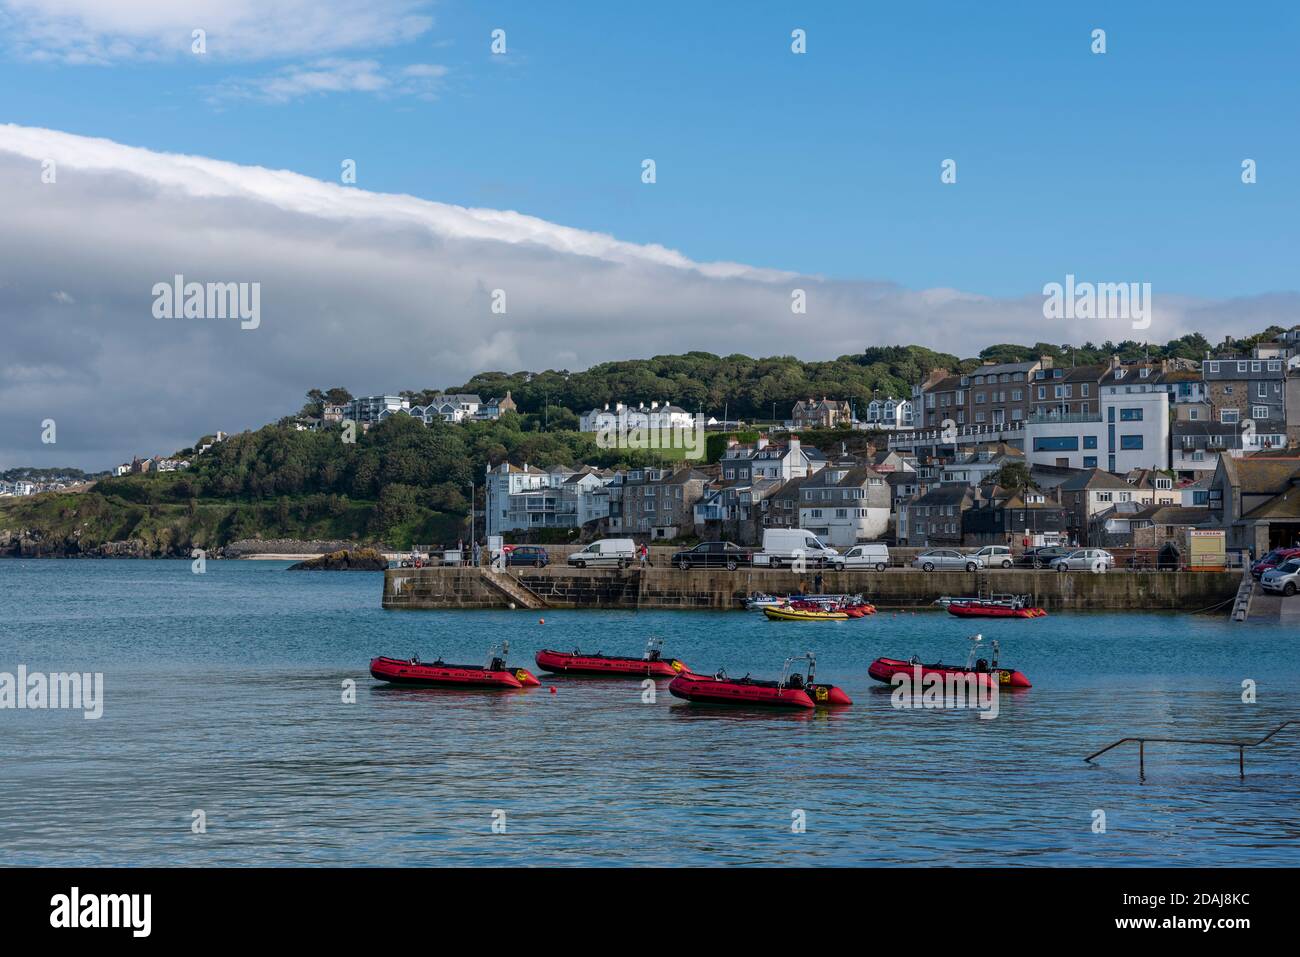 Boats in St Ives harbour at high tide, Cornwall, UK Stock Photo